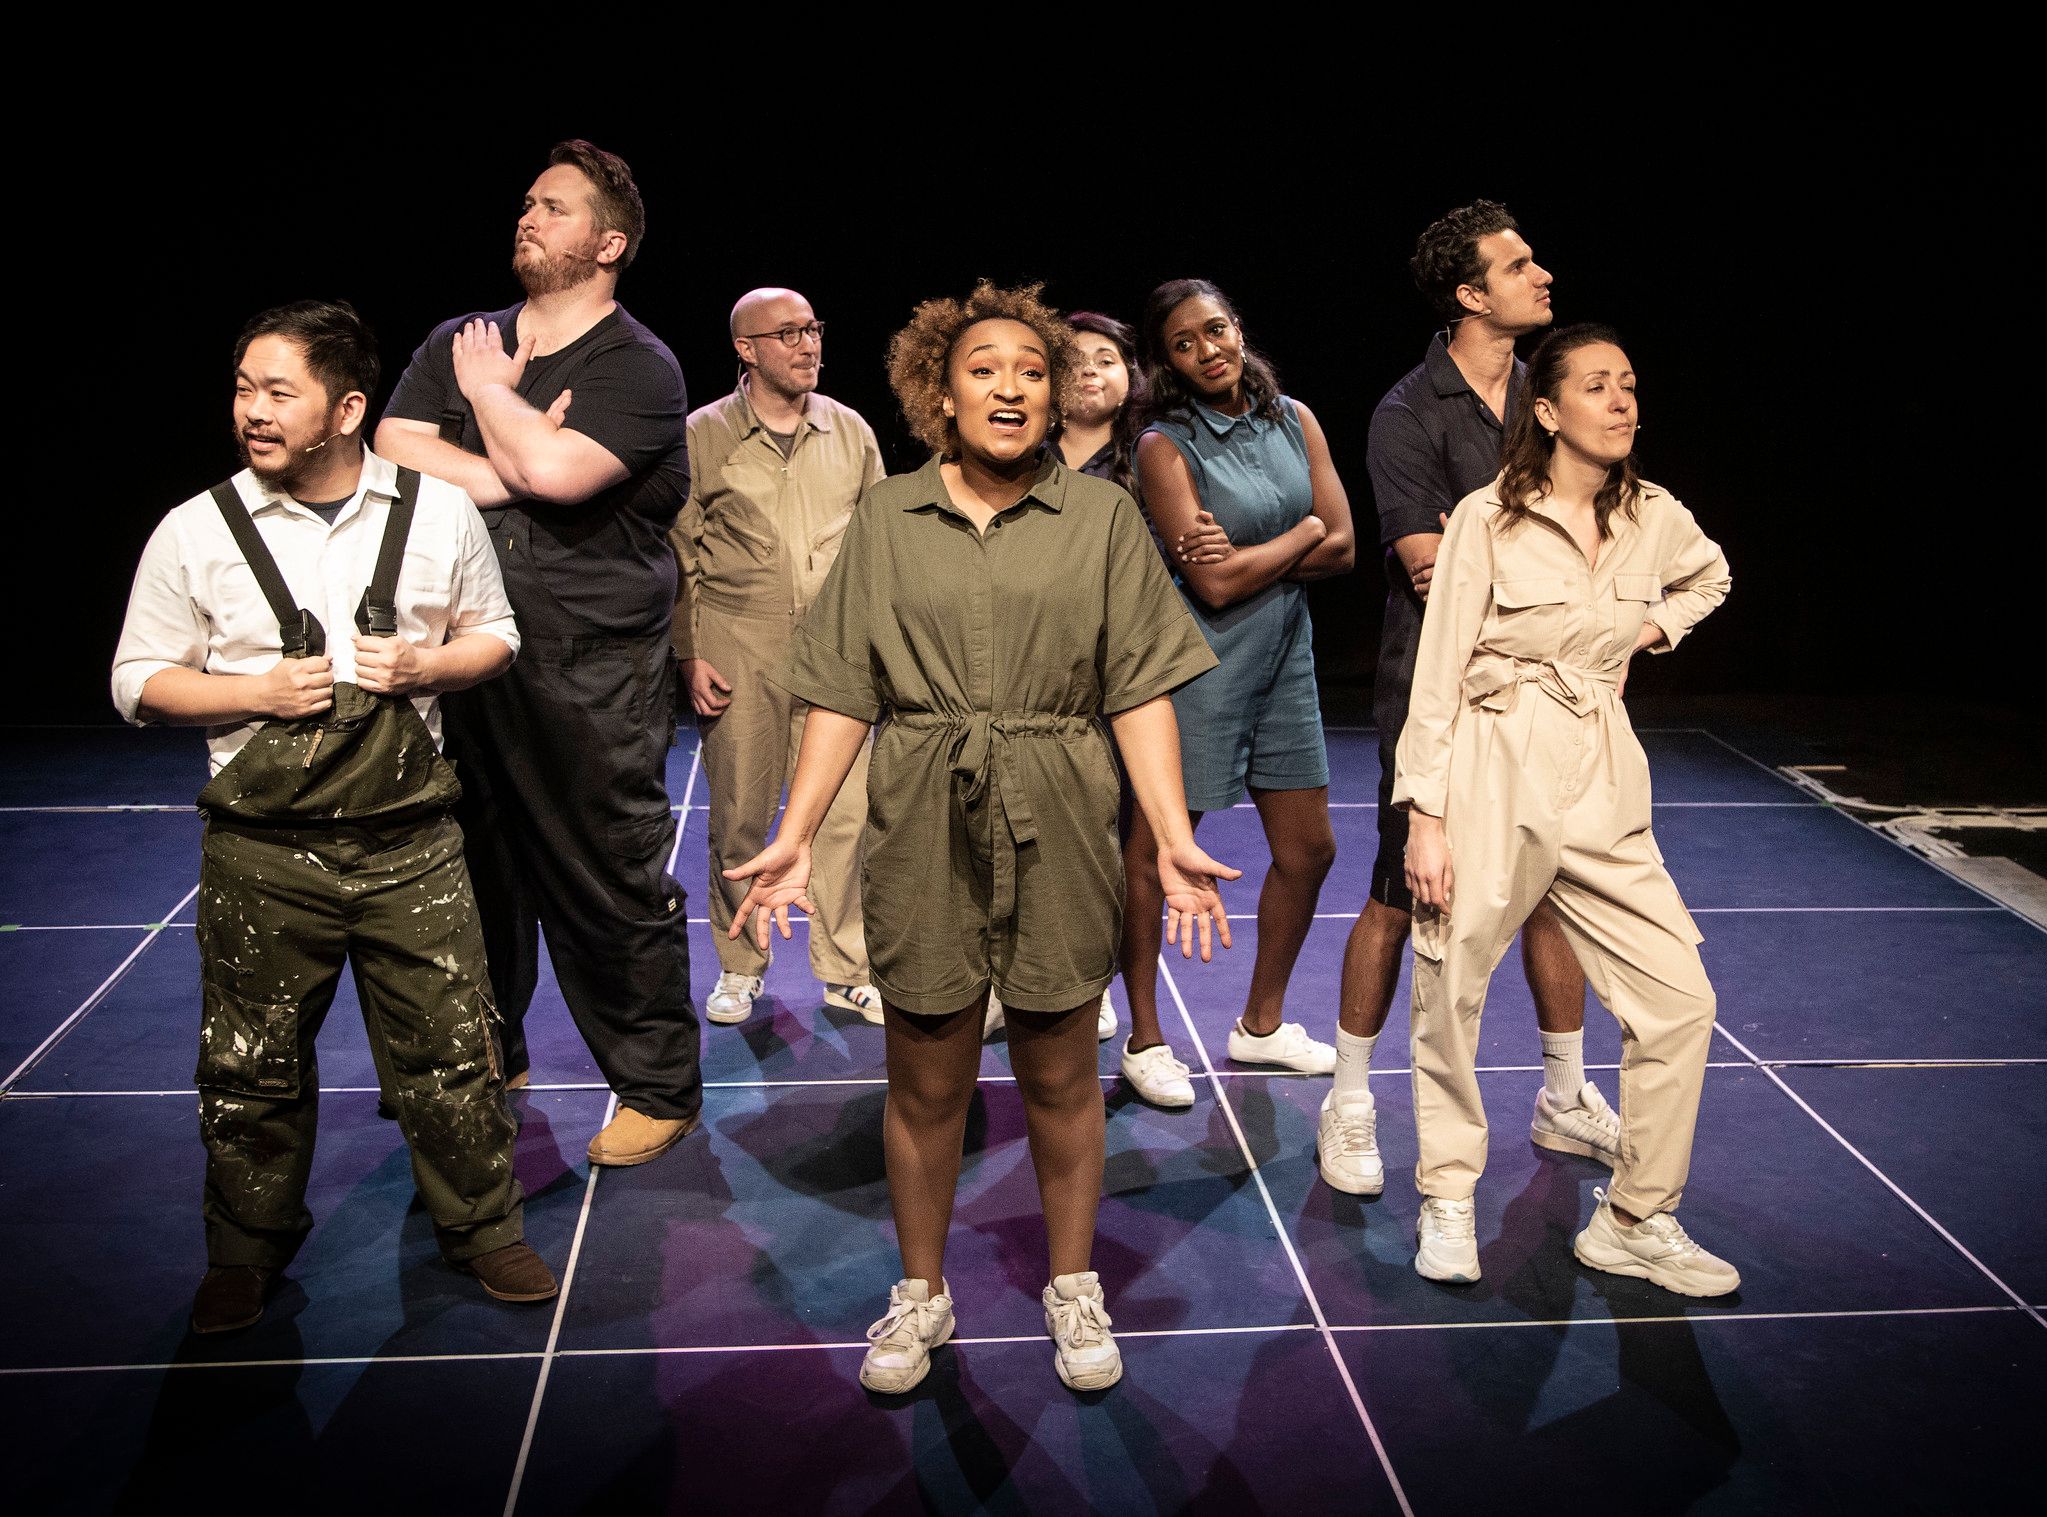 Diversity and inclusion: the cast of Sedos’ 2021 production of Working